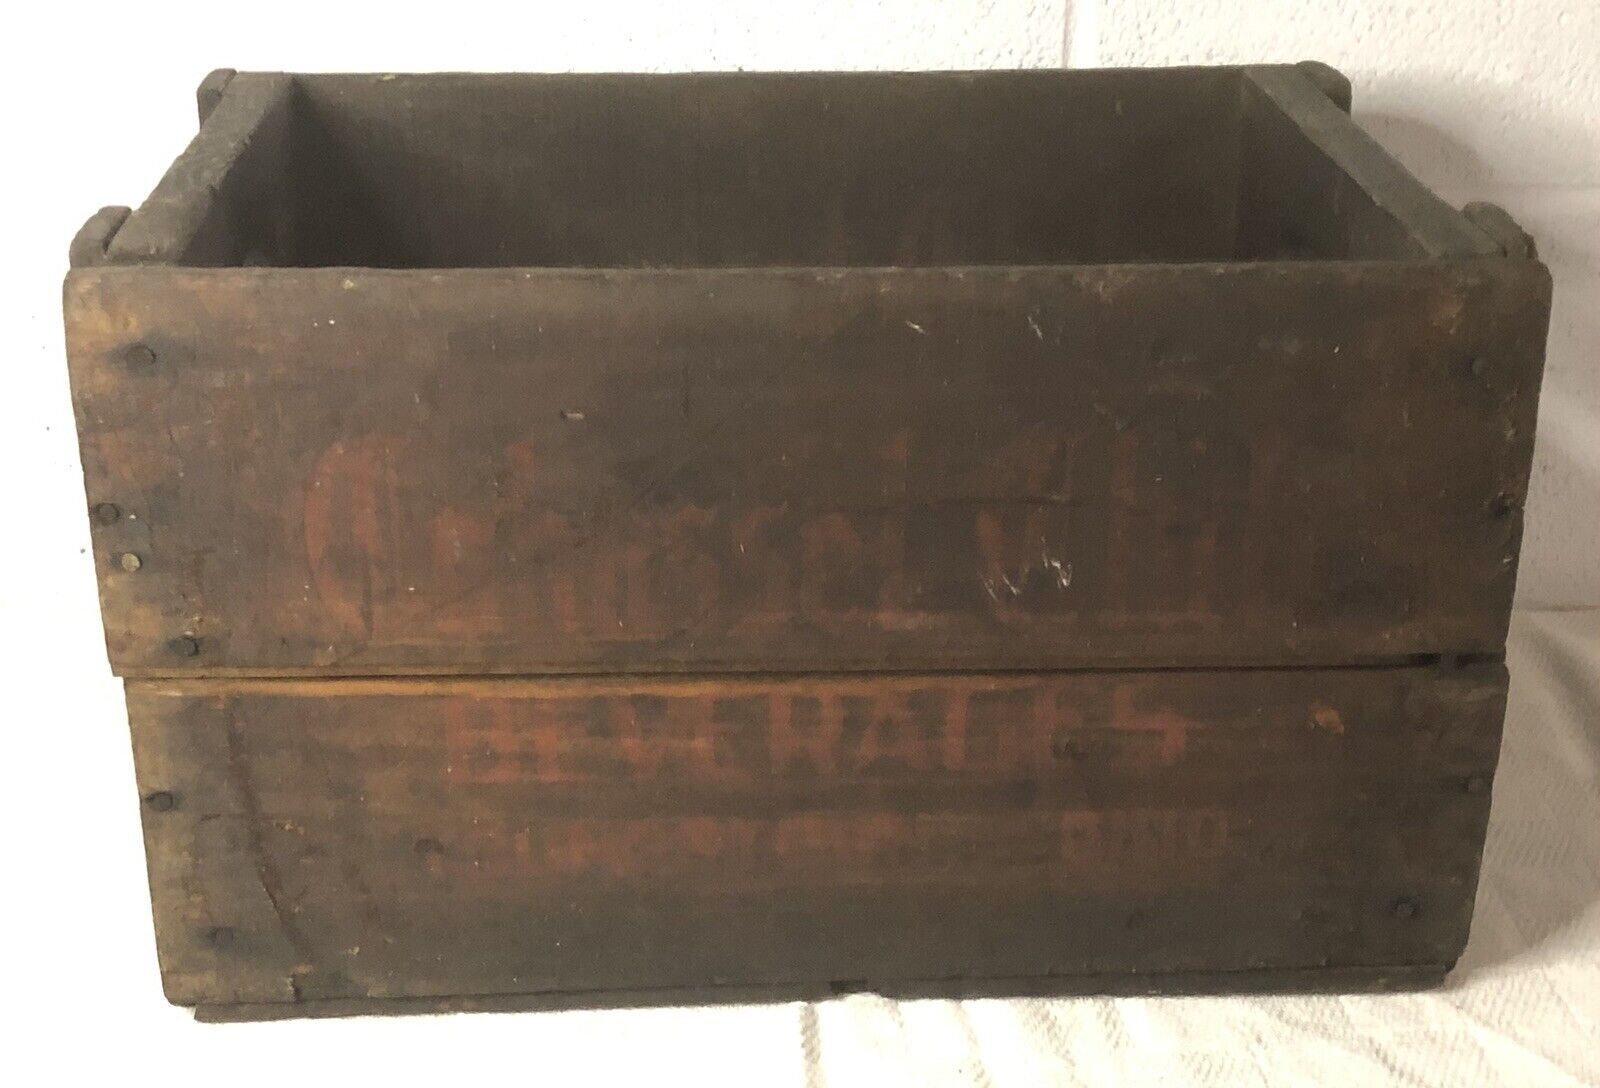 RARE Antique Vtg Cohasset Club Beverage Co. Youngstown Ohio Wood Crate Soda Pop